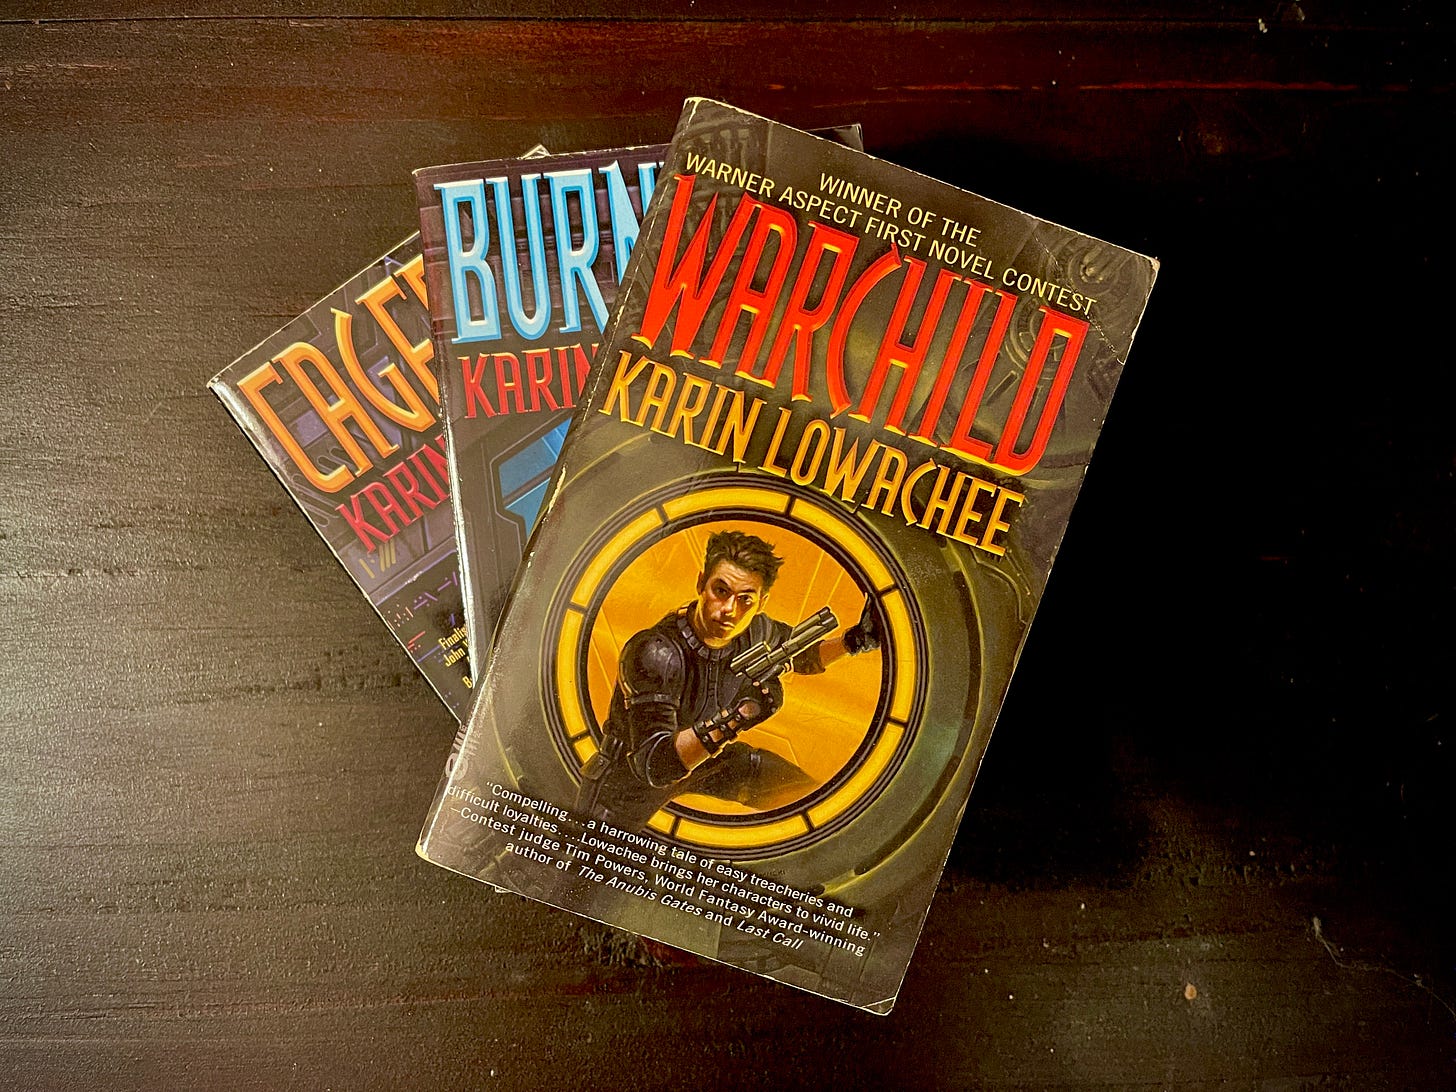 Three books in a spiral stack. The book on the top is Warchild by Karin Lowachee, and features a person on the cover stepping through a portal with a gun. 